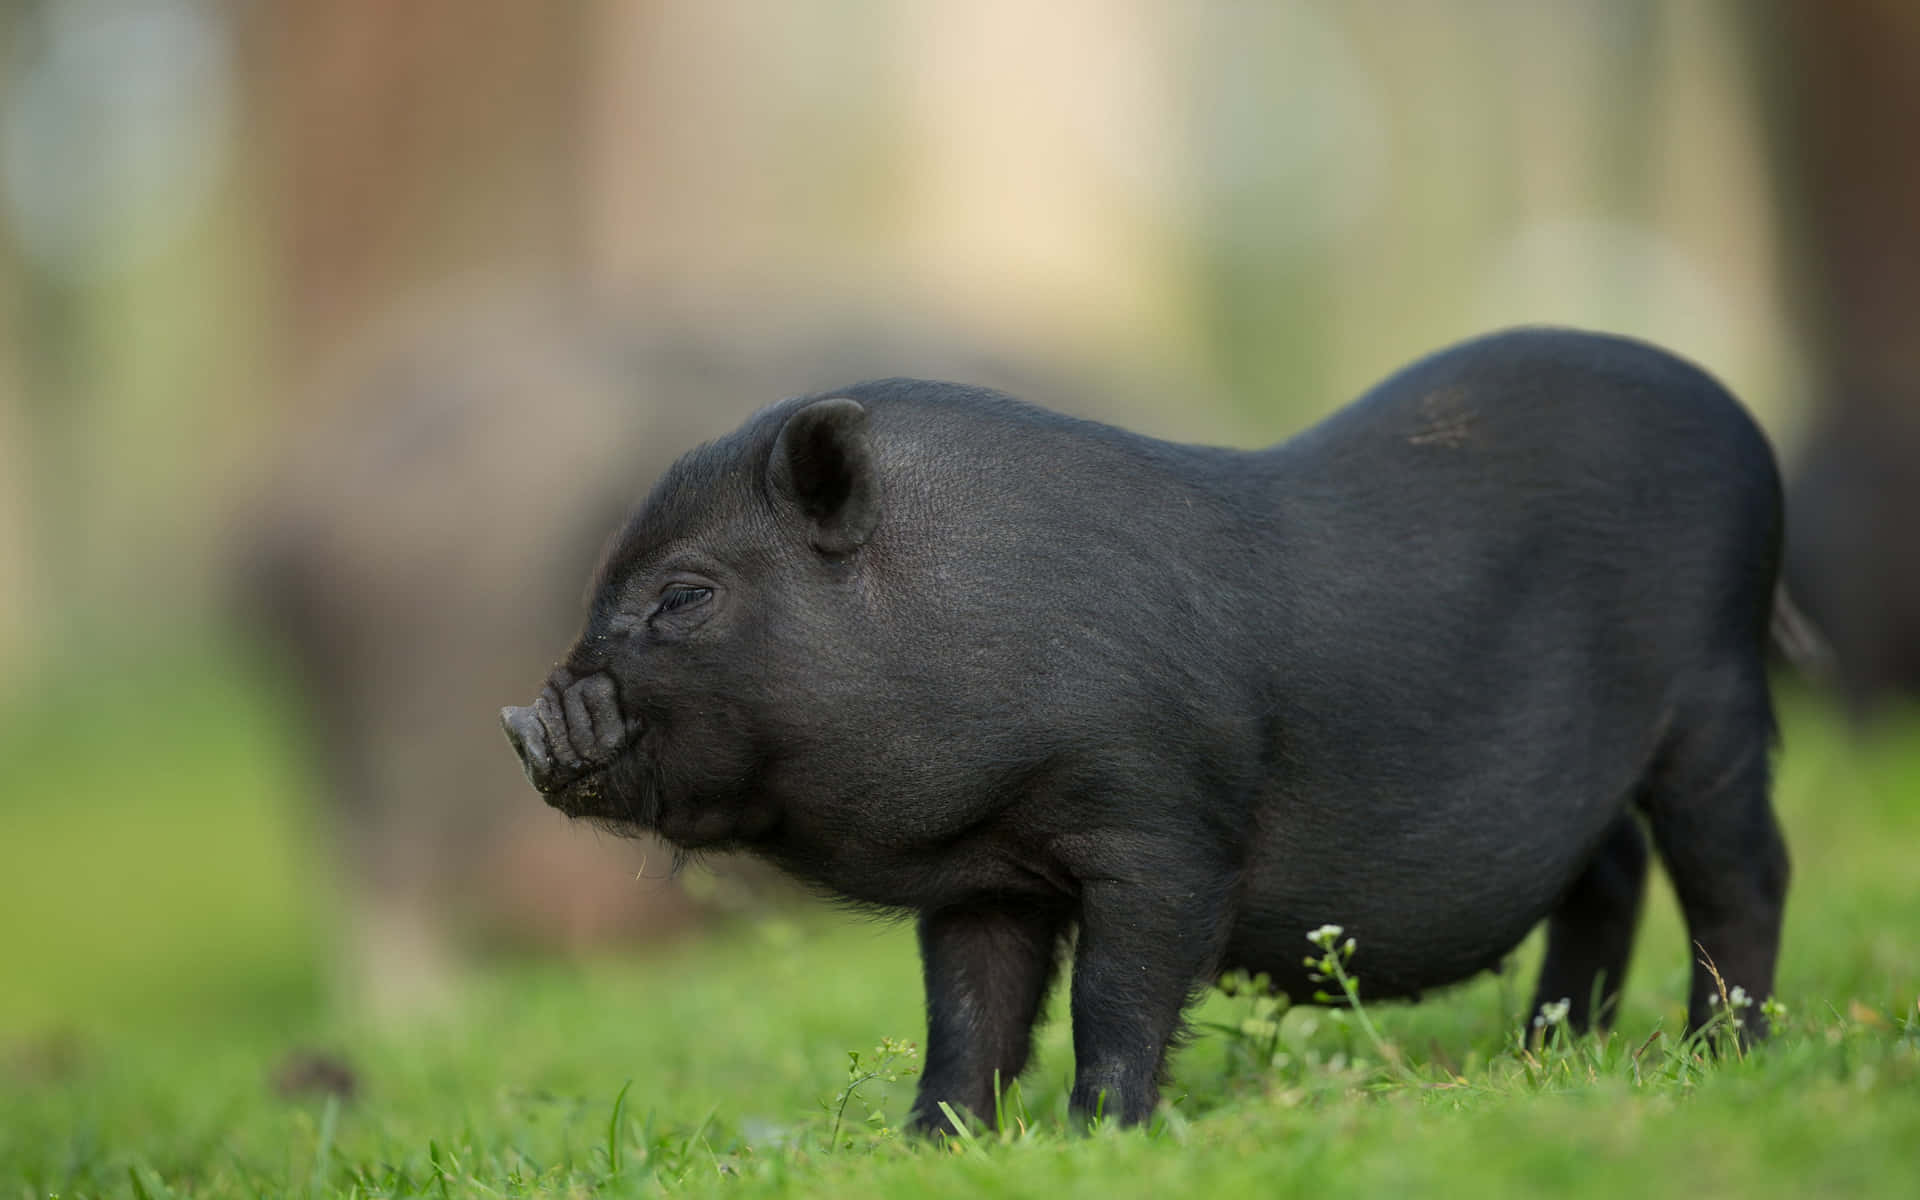 A Black Pig Standing In A Field